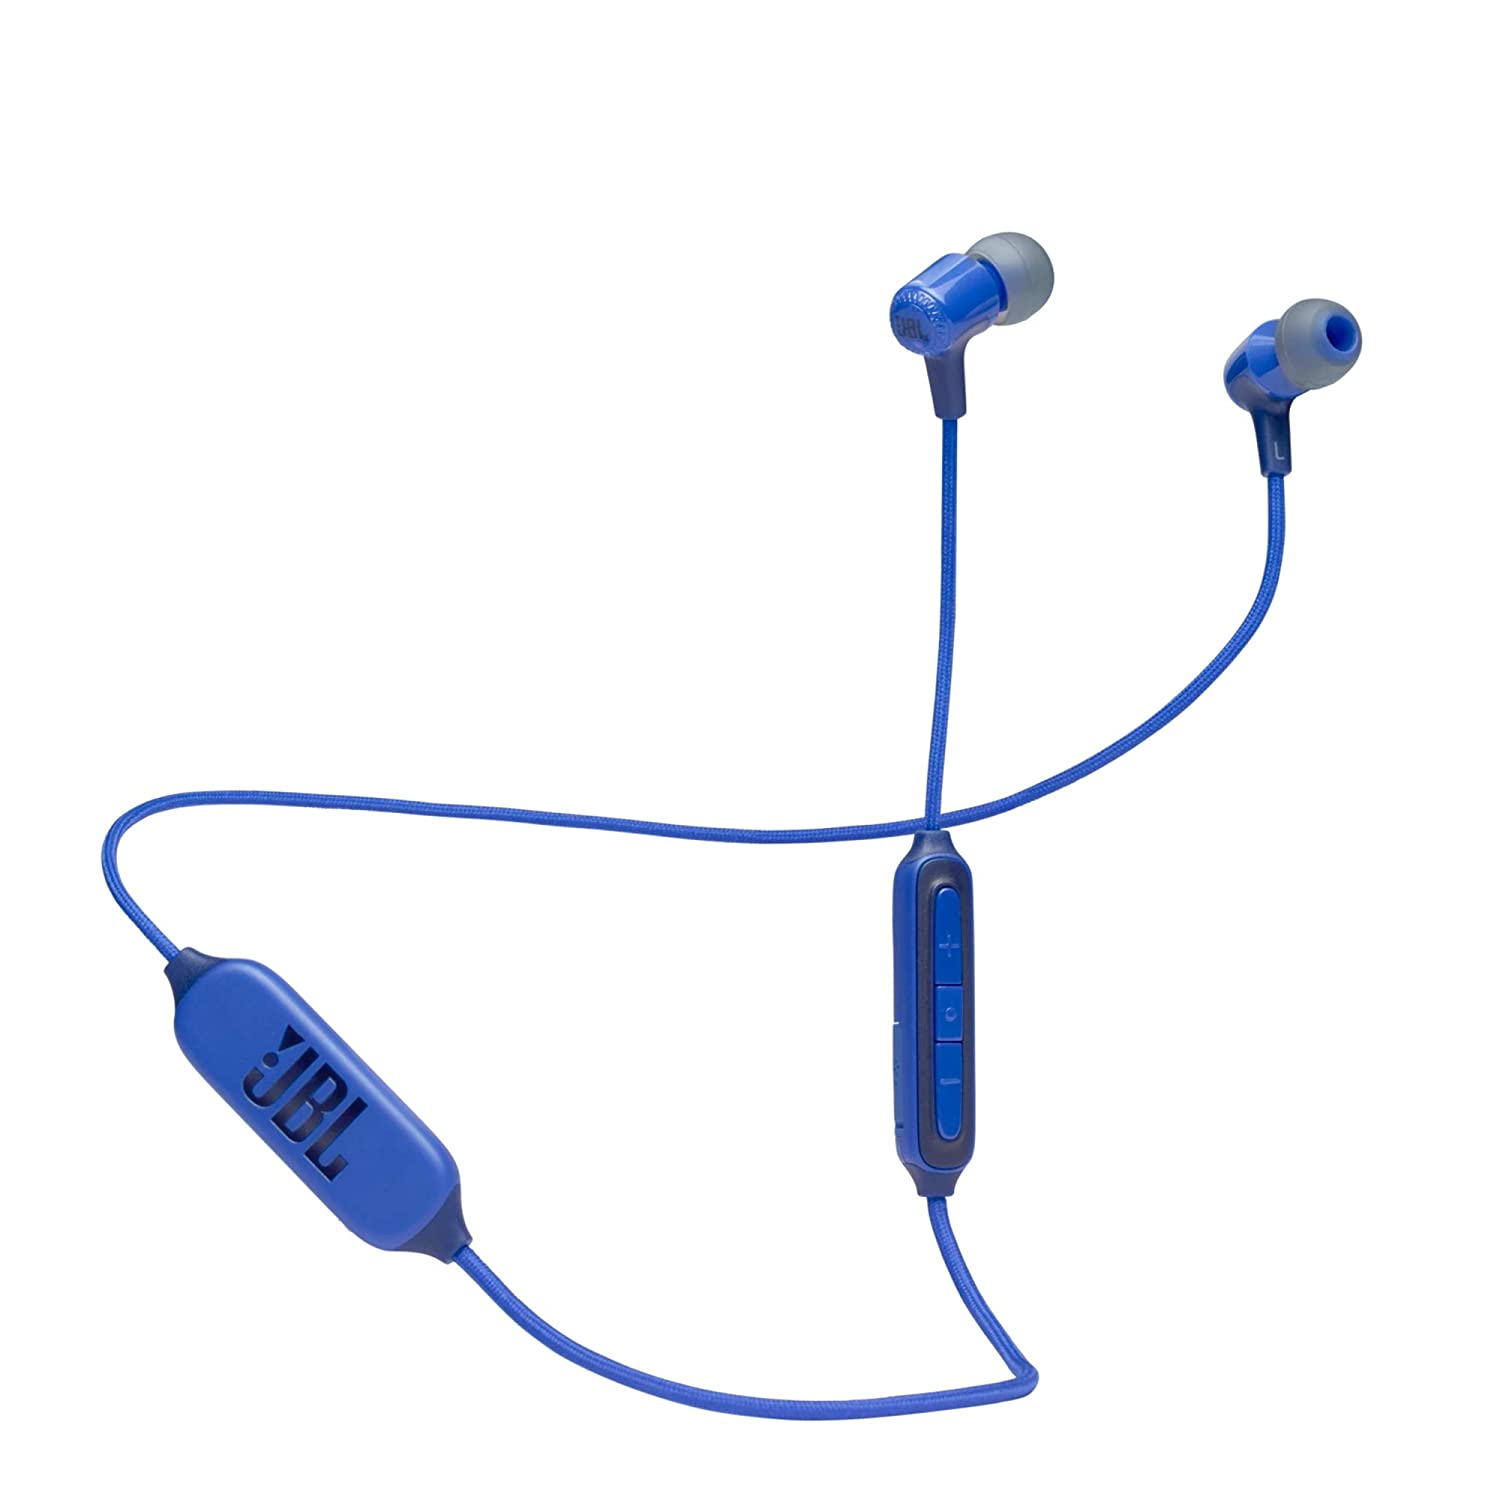 JBL Live 100BT by Harman in-Ear Bluetooth Headphone with Bulit-in Mic, Multi-Point Connection, 9 Hours of Playtime and Voice Assistance (Blue)